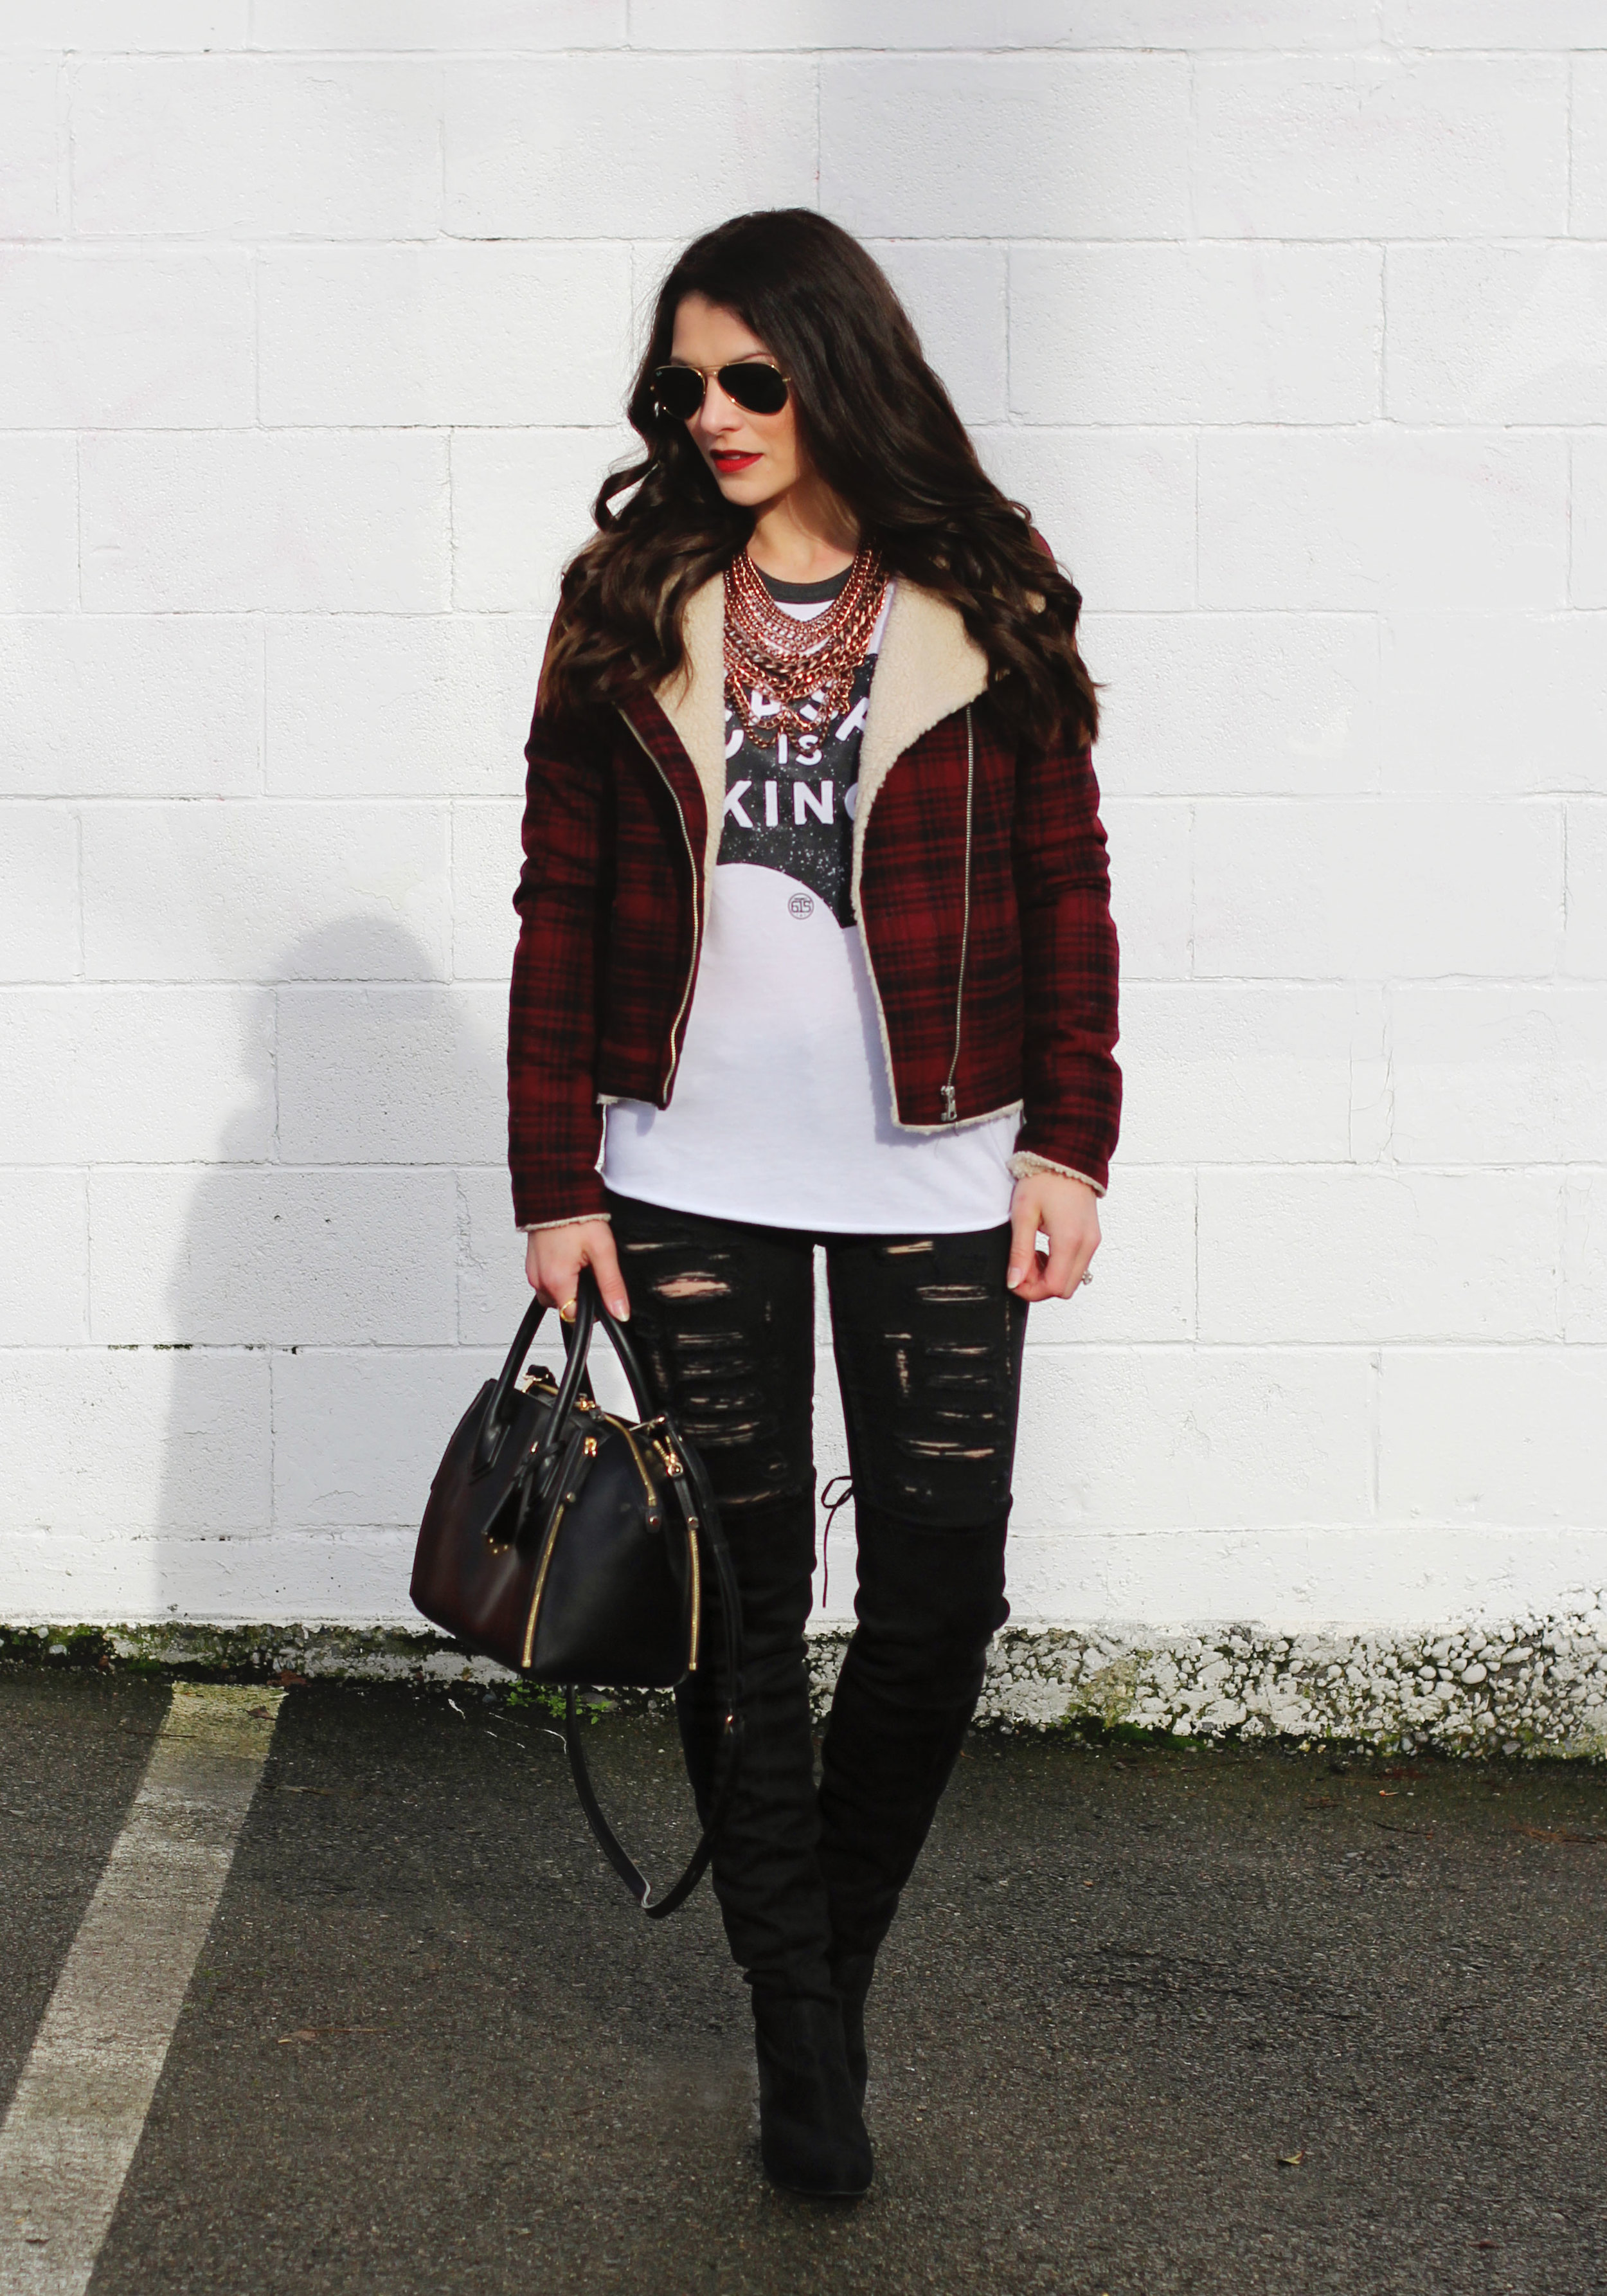 Winter OOTD, Plaid Moto Jacket, Johnny Cash Tee, Ripped Skinny Jeans, Steve Madden 'Gorgeous' Over The Knee Boots, Rebecca Minkoff 'Mini Perry' Satchel, Ray-Ban Aviators, Baublebar 'Courtney' Necklace